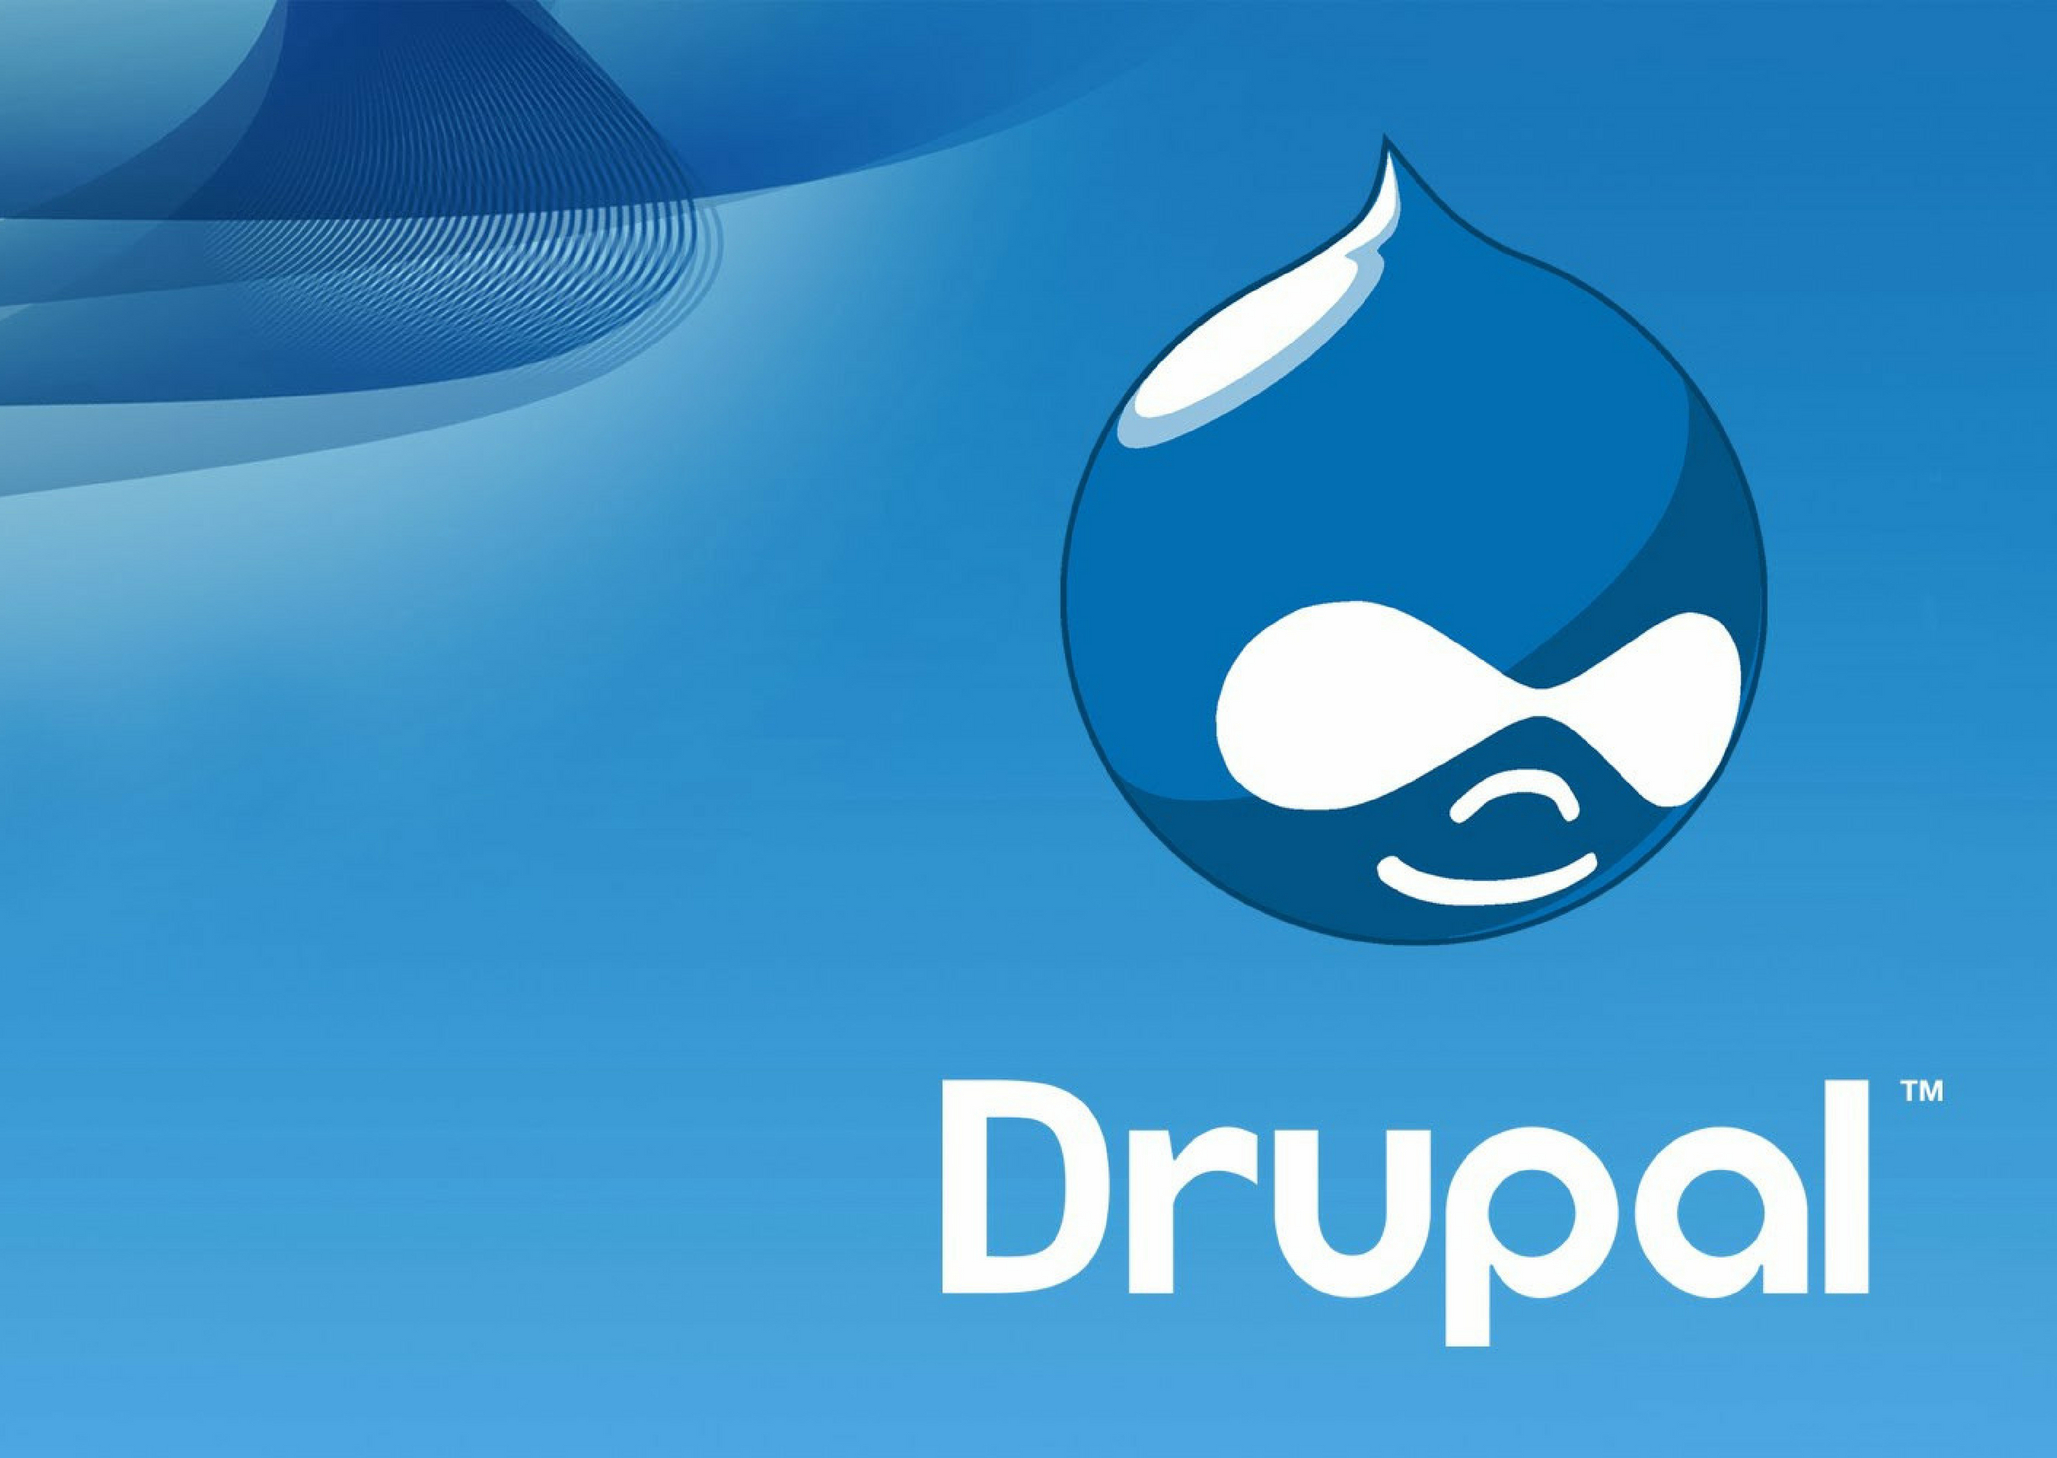 Is Drupal CMS going to reach to the top?